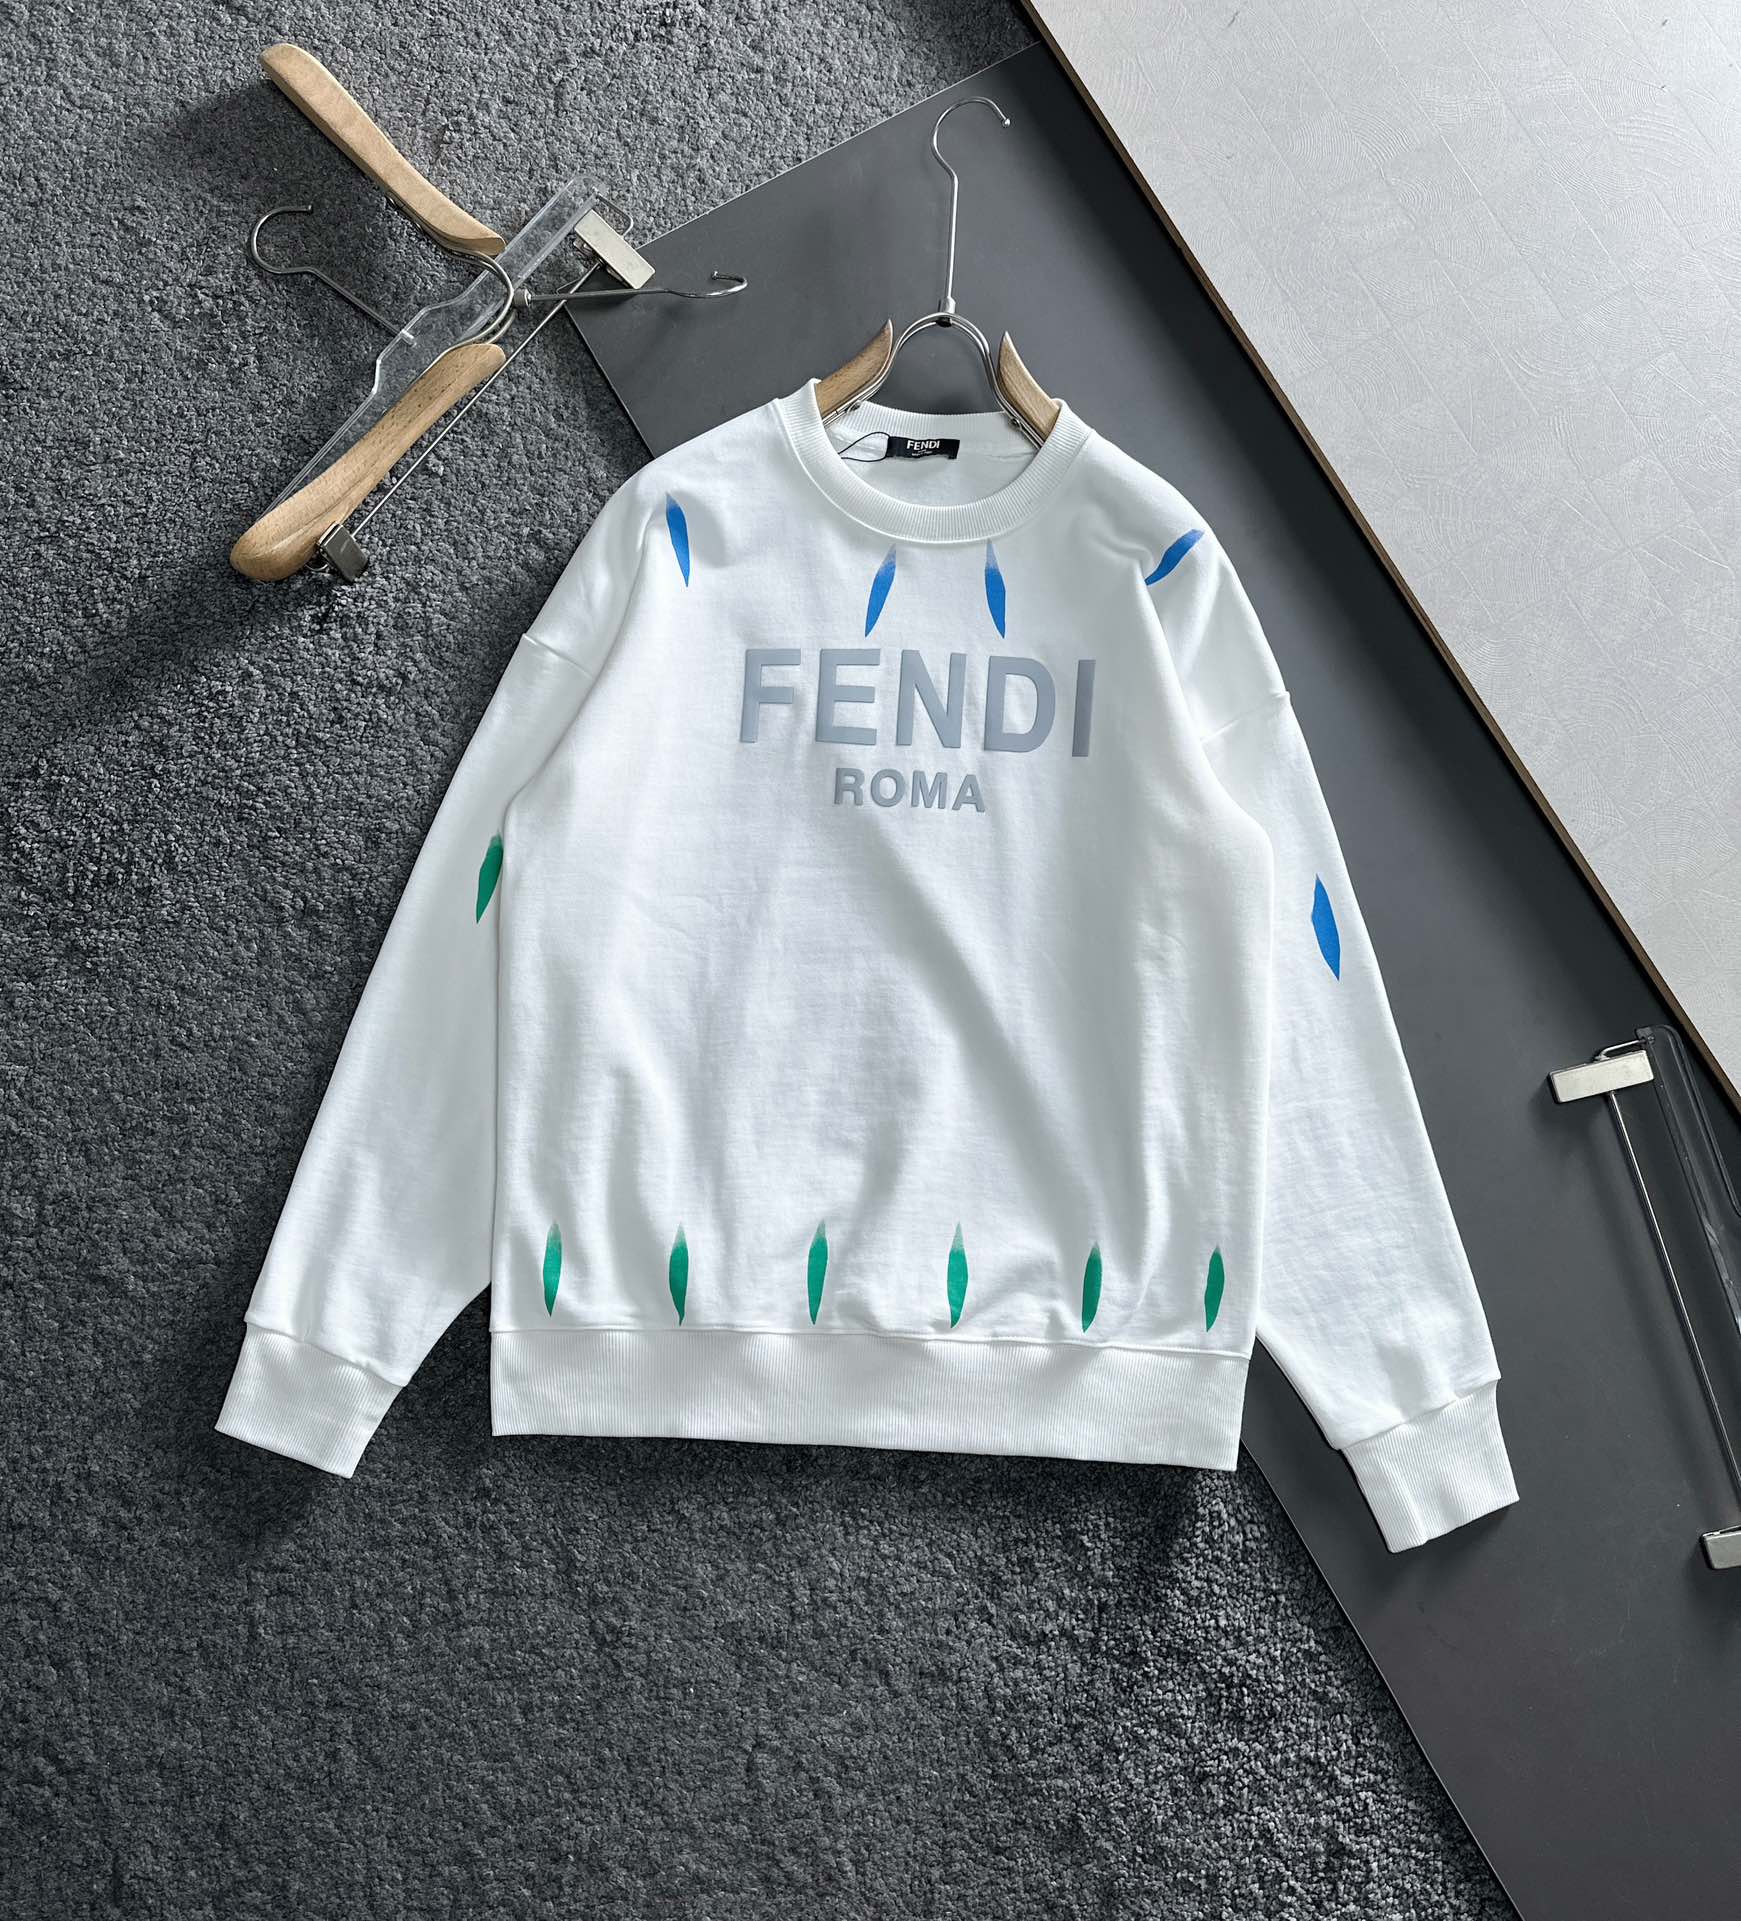 Where could you find a great quality designer
 Fendi Clothing Sweatshirts Same as Original
 Black White Cotton